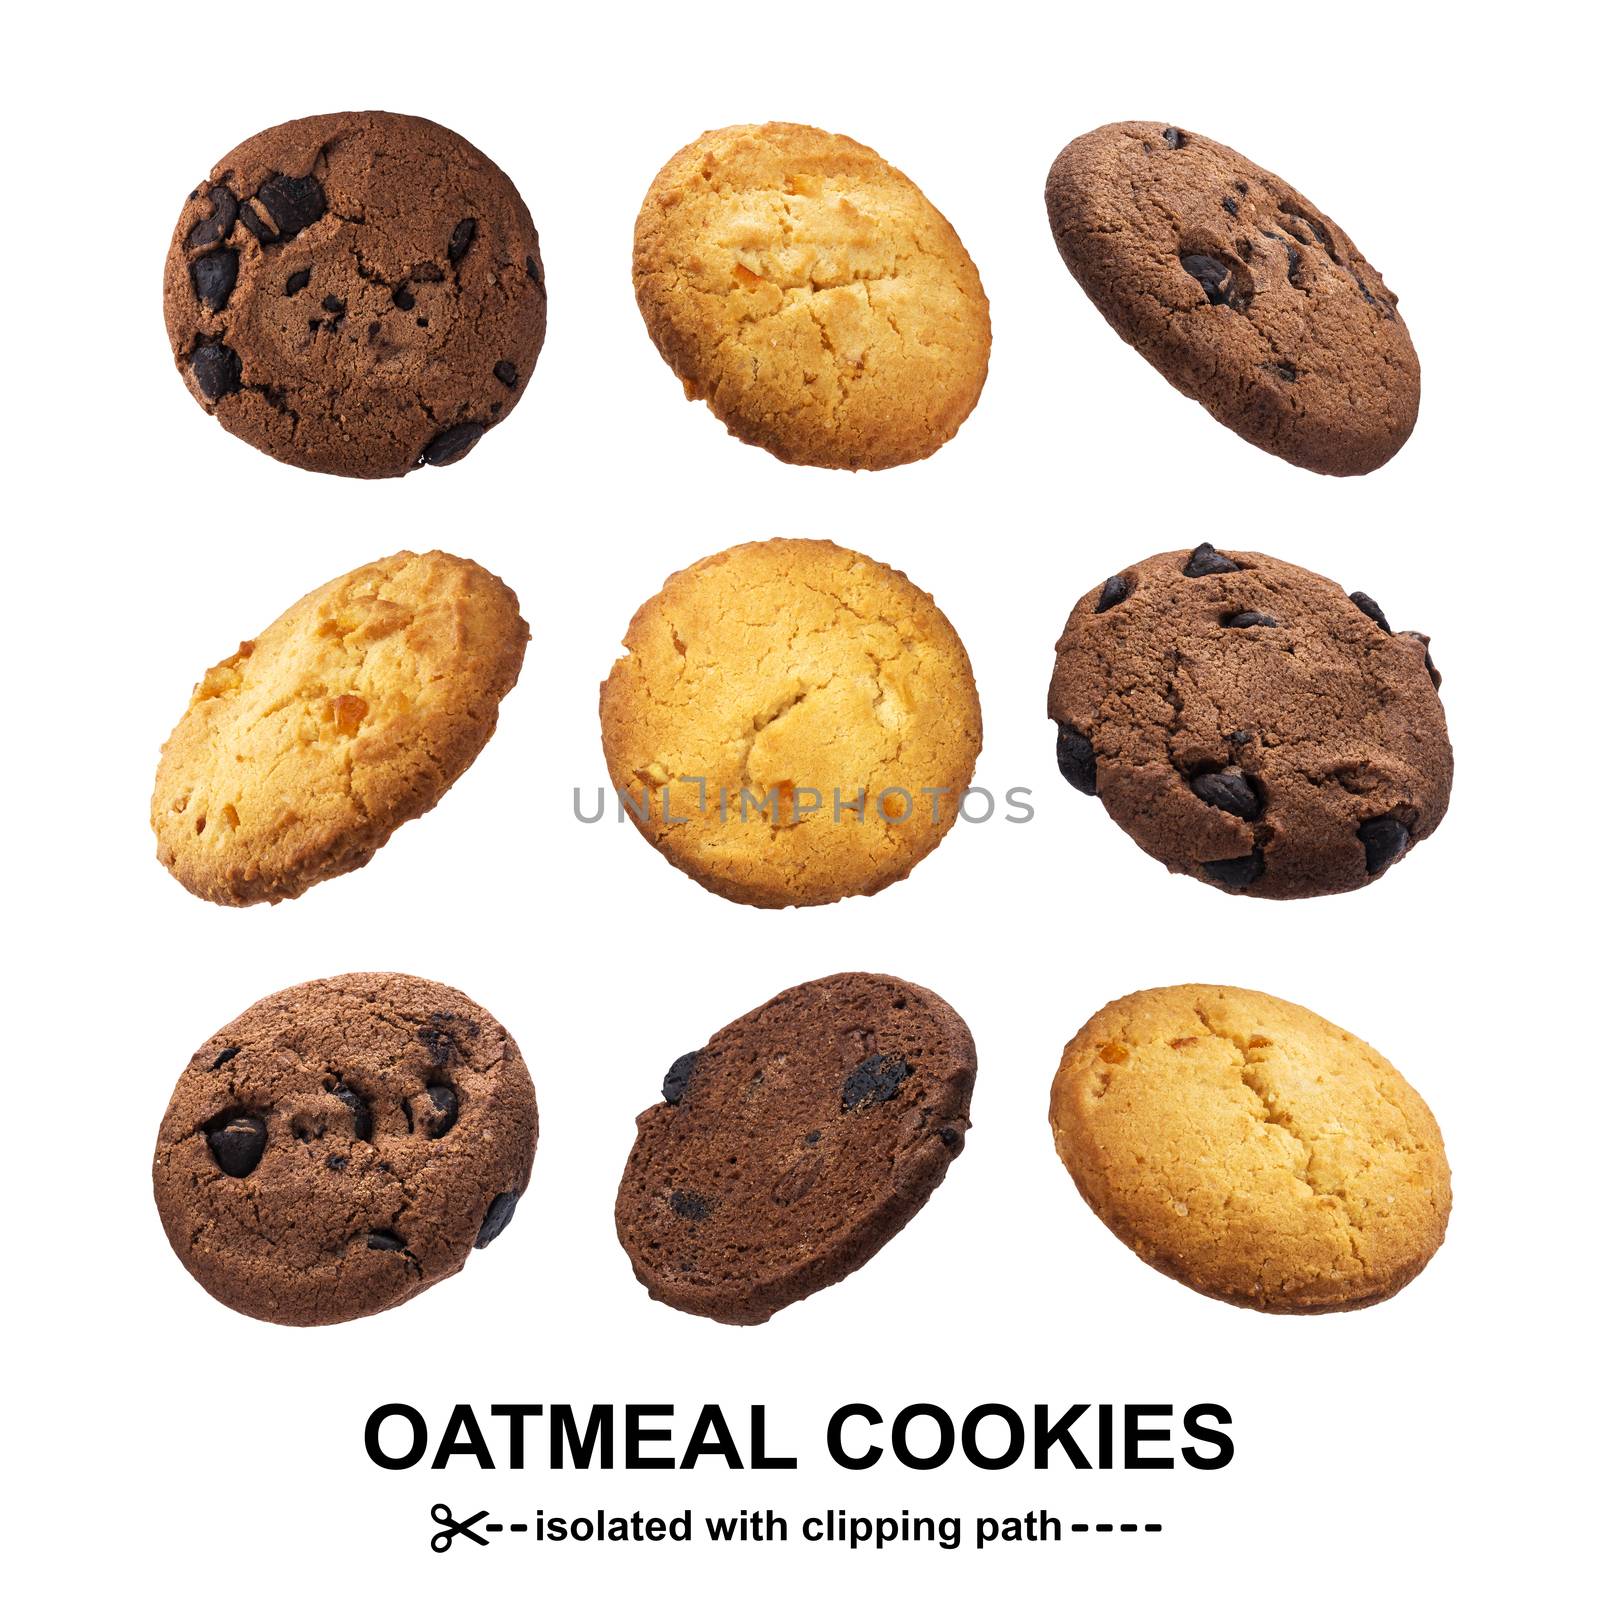 Oatmeal cookies isolated on white background by xamtiw